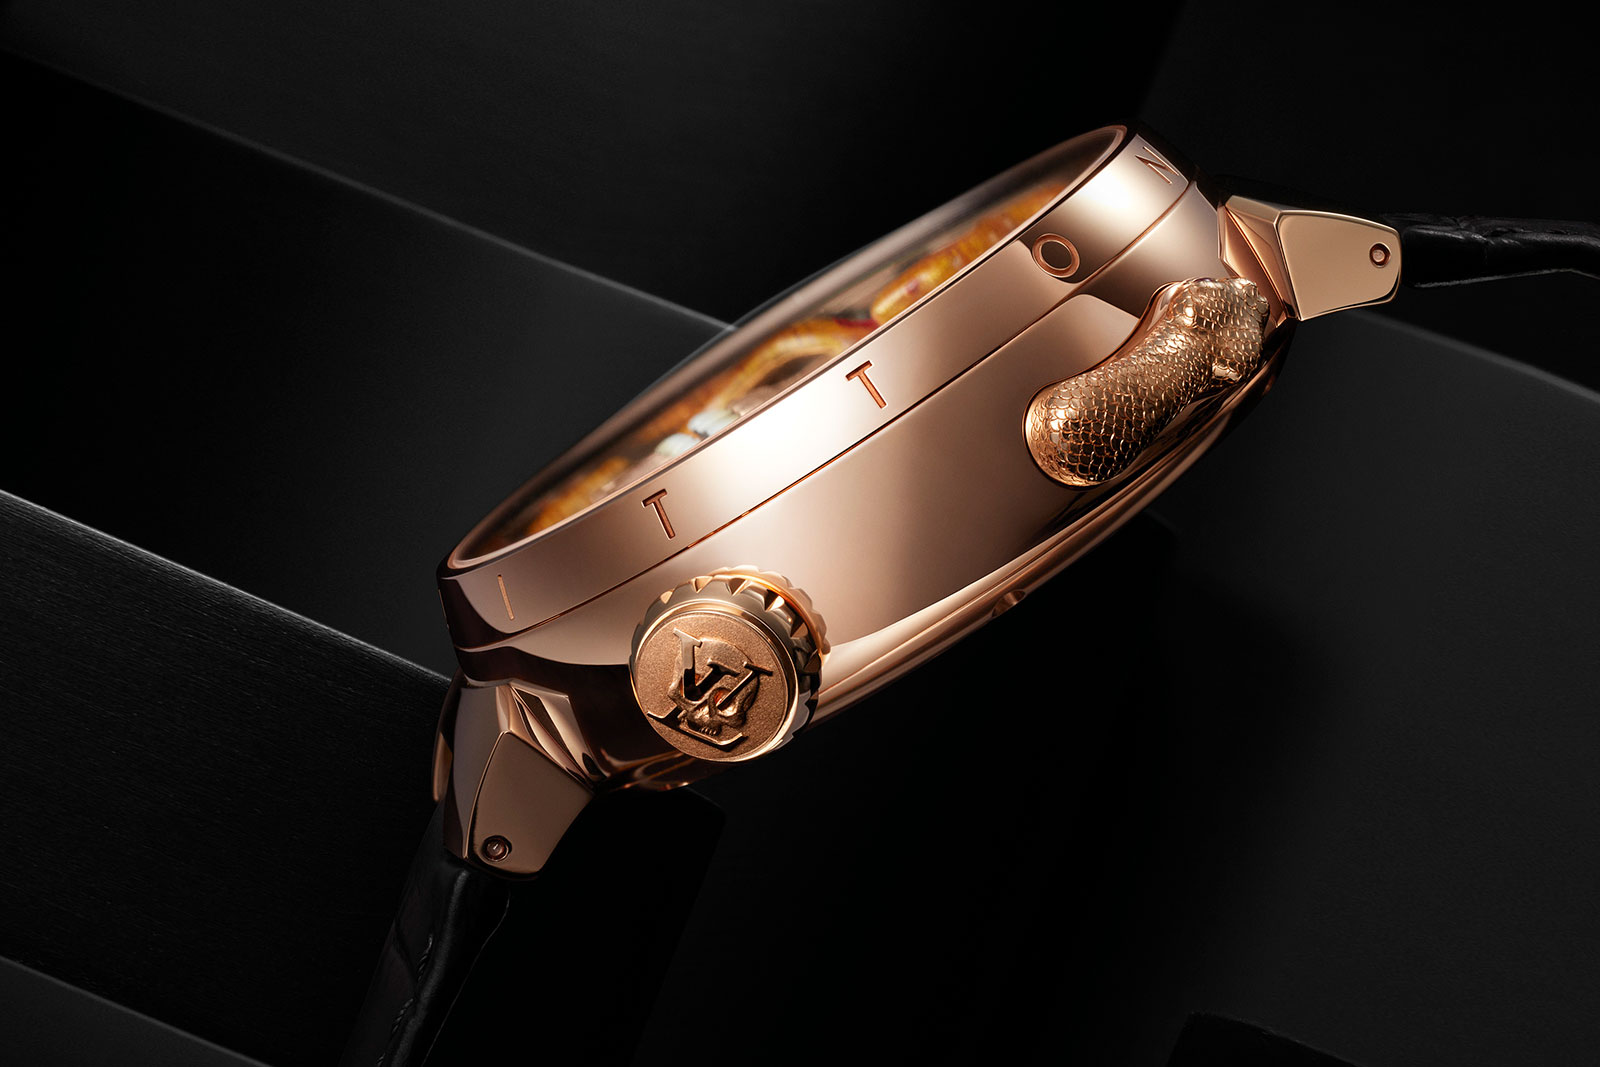 Introducing The New Louis Vuitton Tambour Watch (Video, Live Pics & Review)